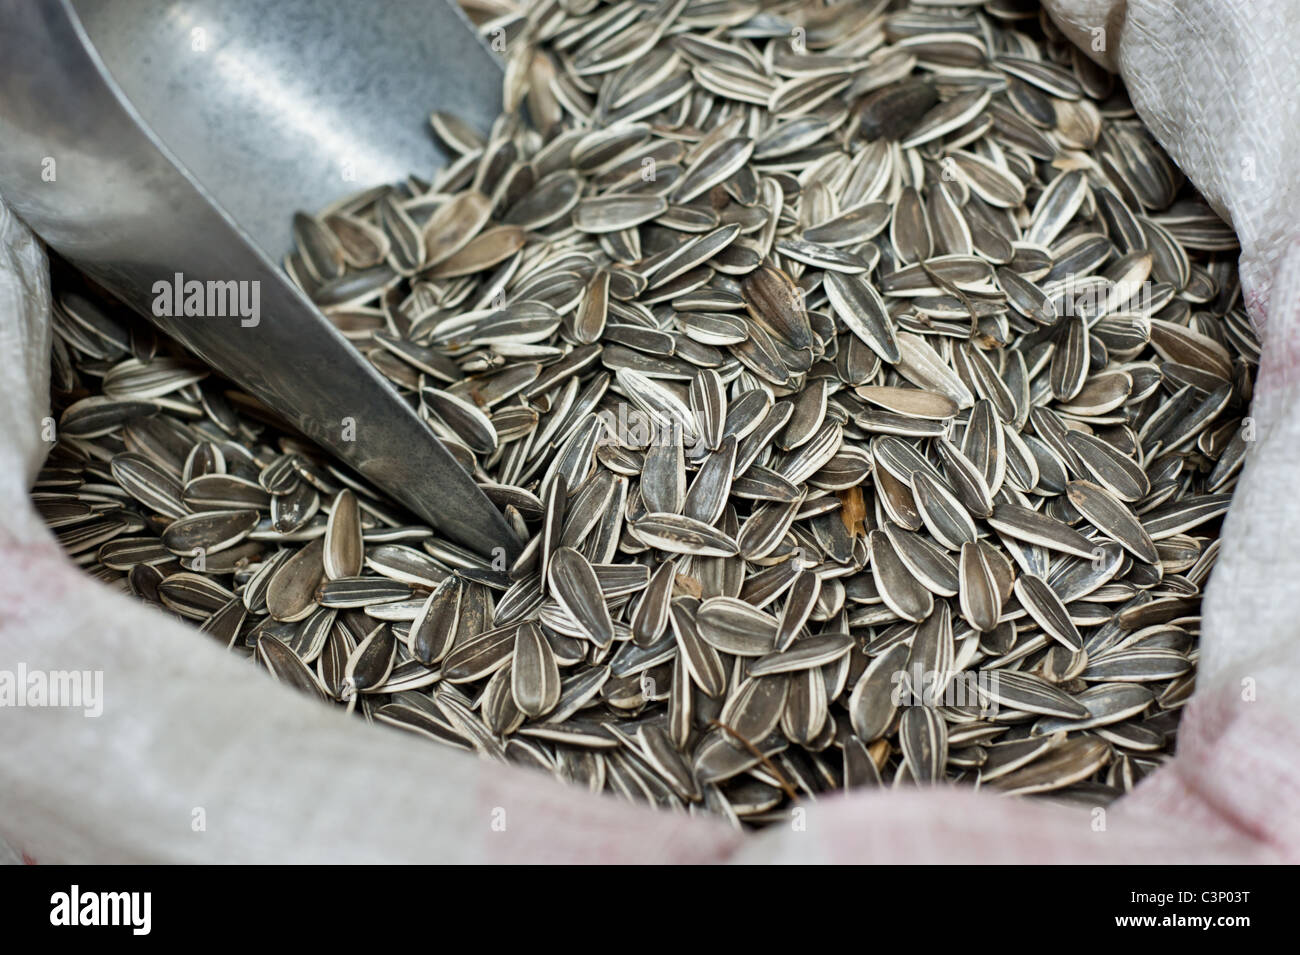 A metal scoop sits in a bag of sunflower seeds in a spice and dry goods store in Nazareth, Israel. Stock Photo